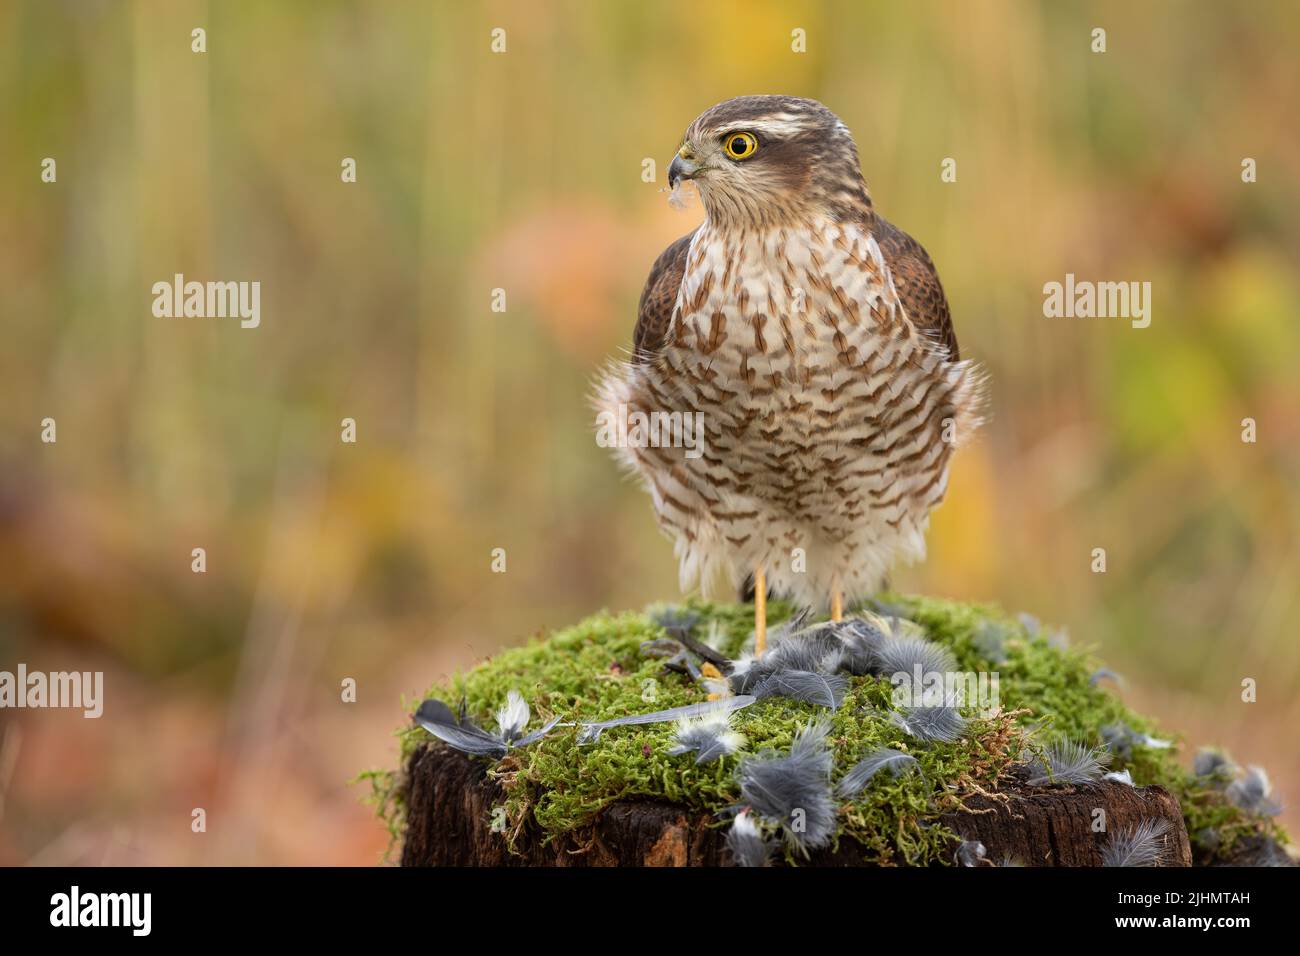 Eurasian sparrowhawk sitting on stump in forest from profile Stock Photo